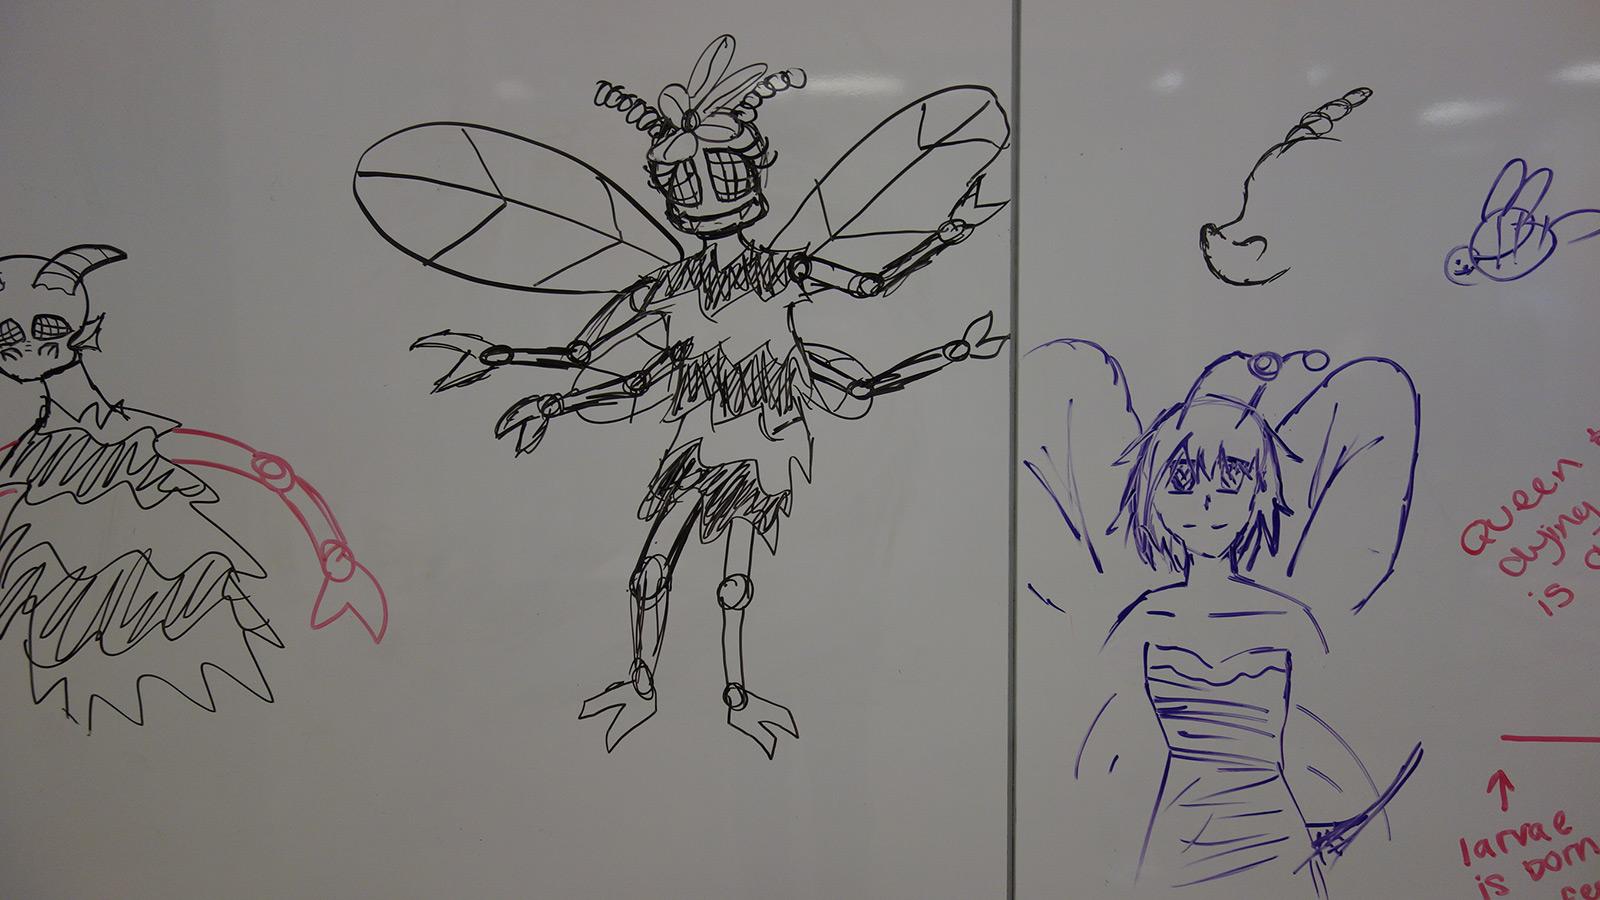 Sketches on a whiteboard